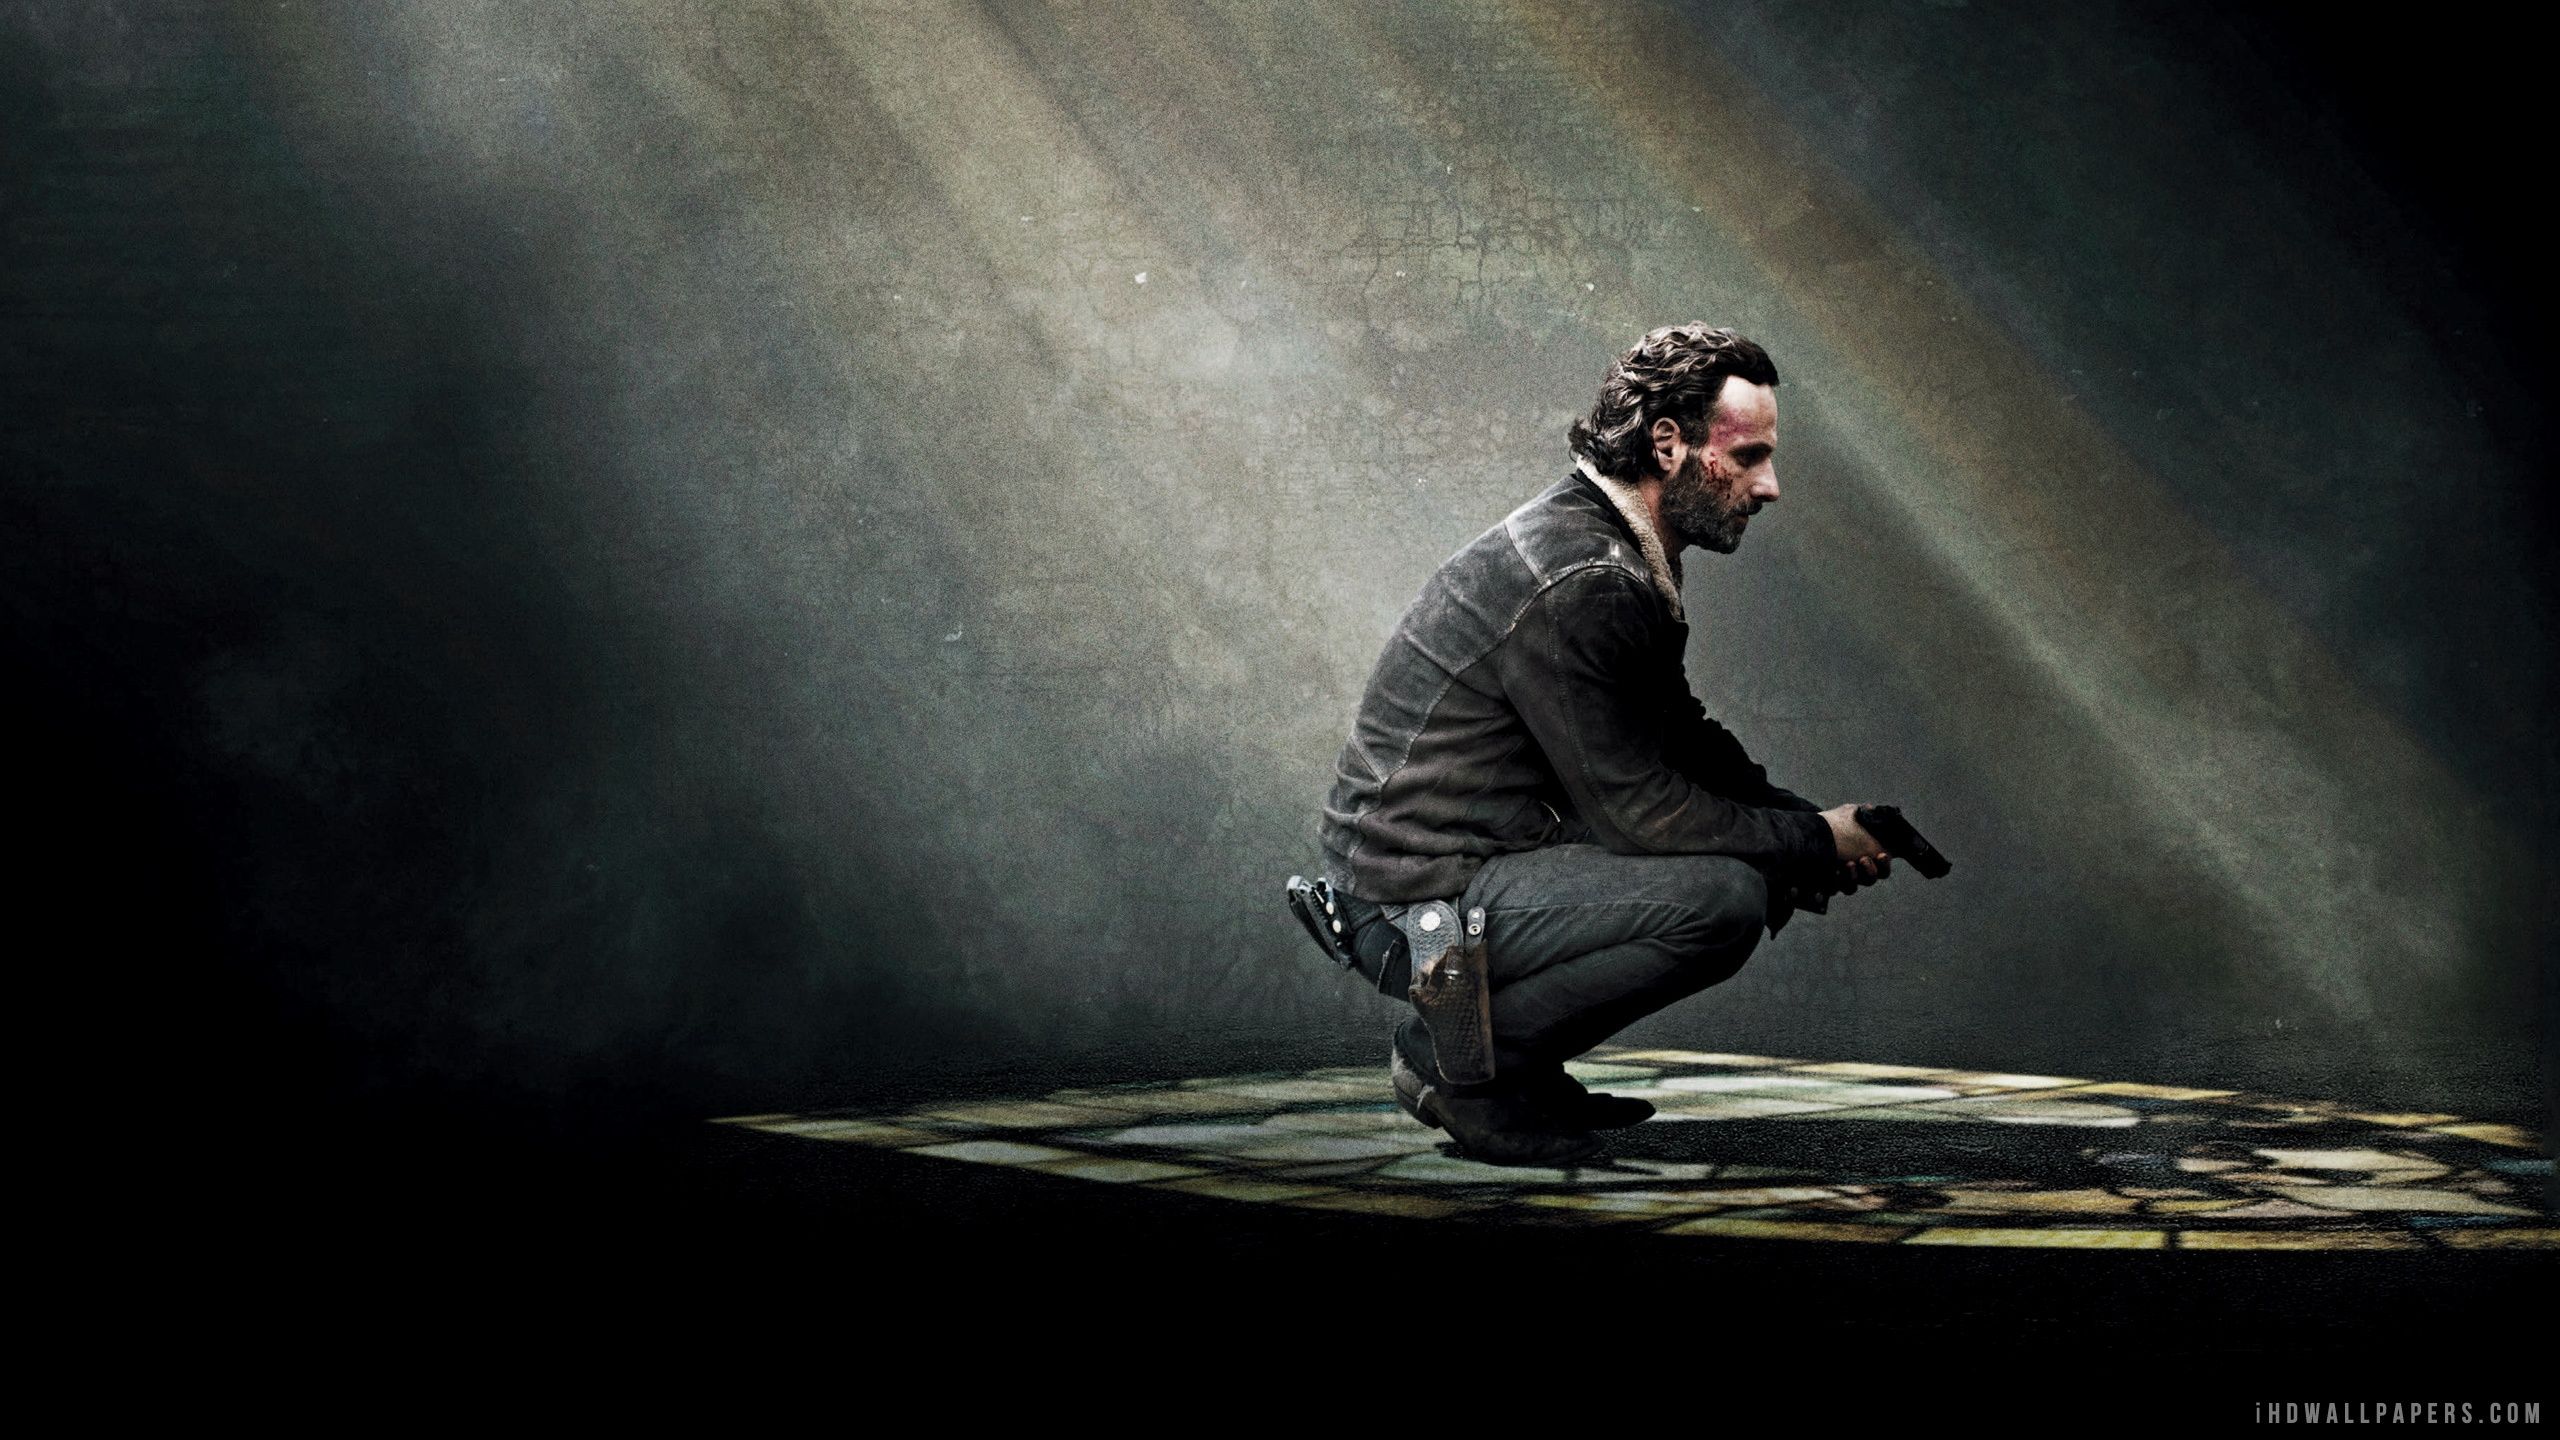 Free download Andrew Lincoln The Walking Dead HD Wallpaper iHD